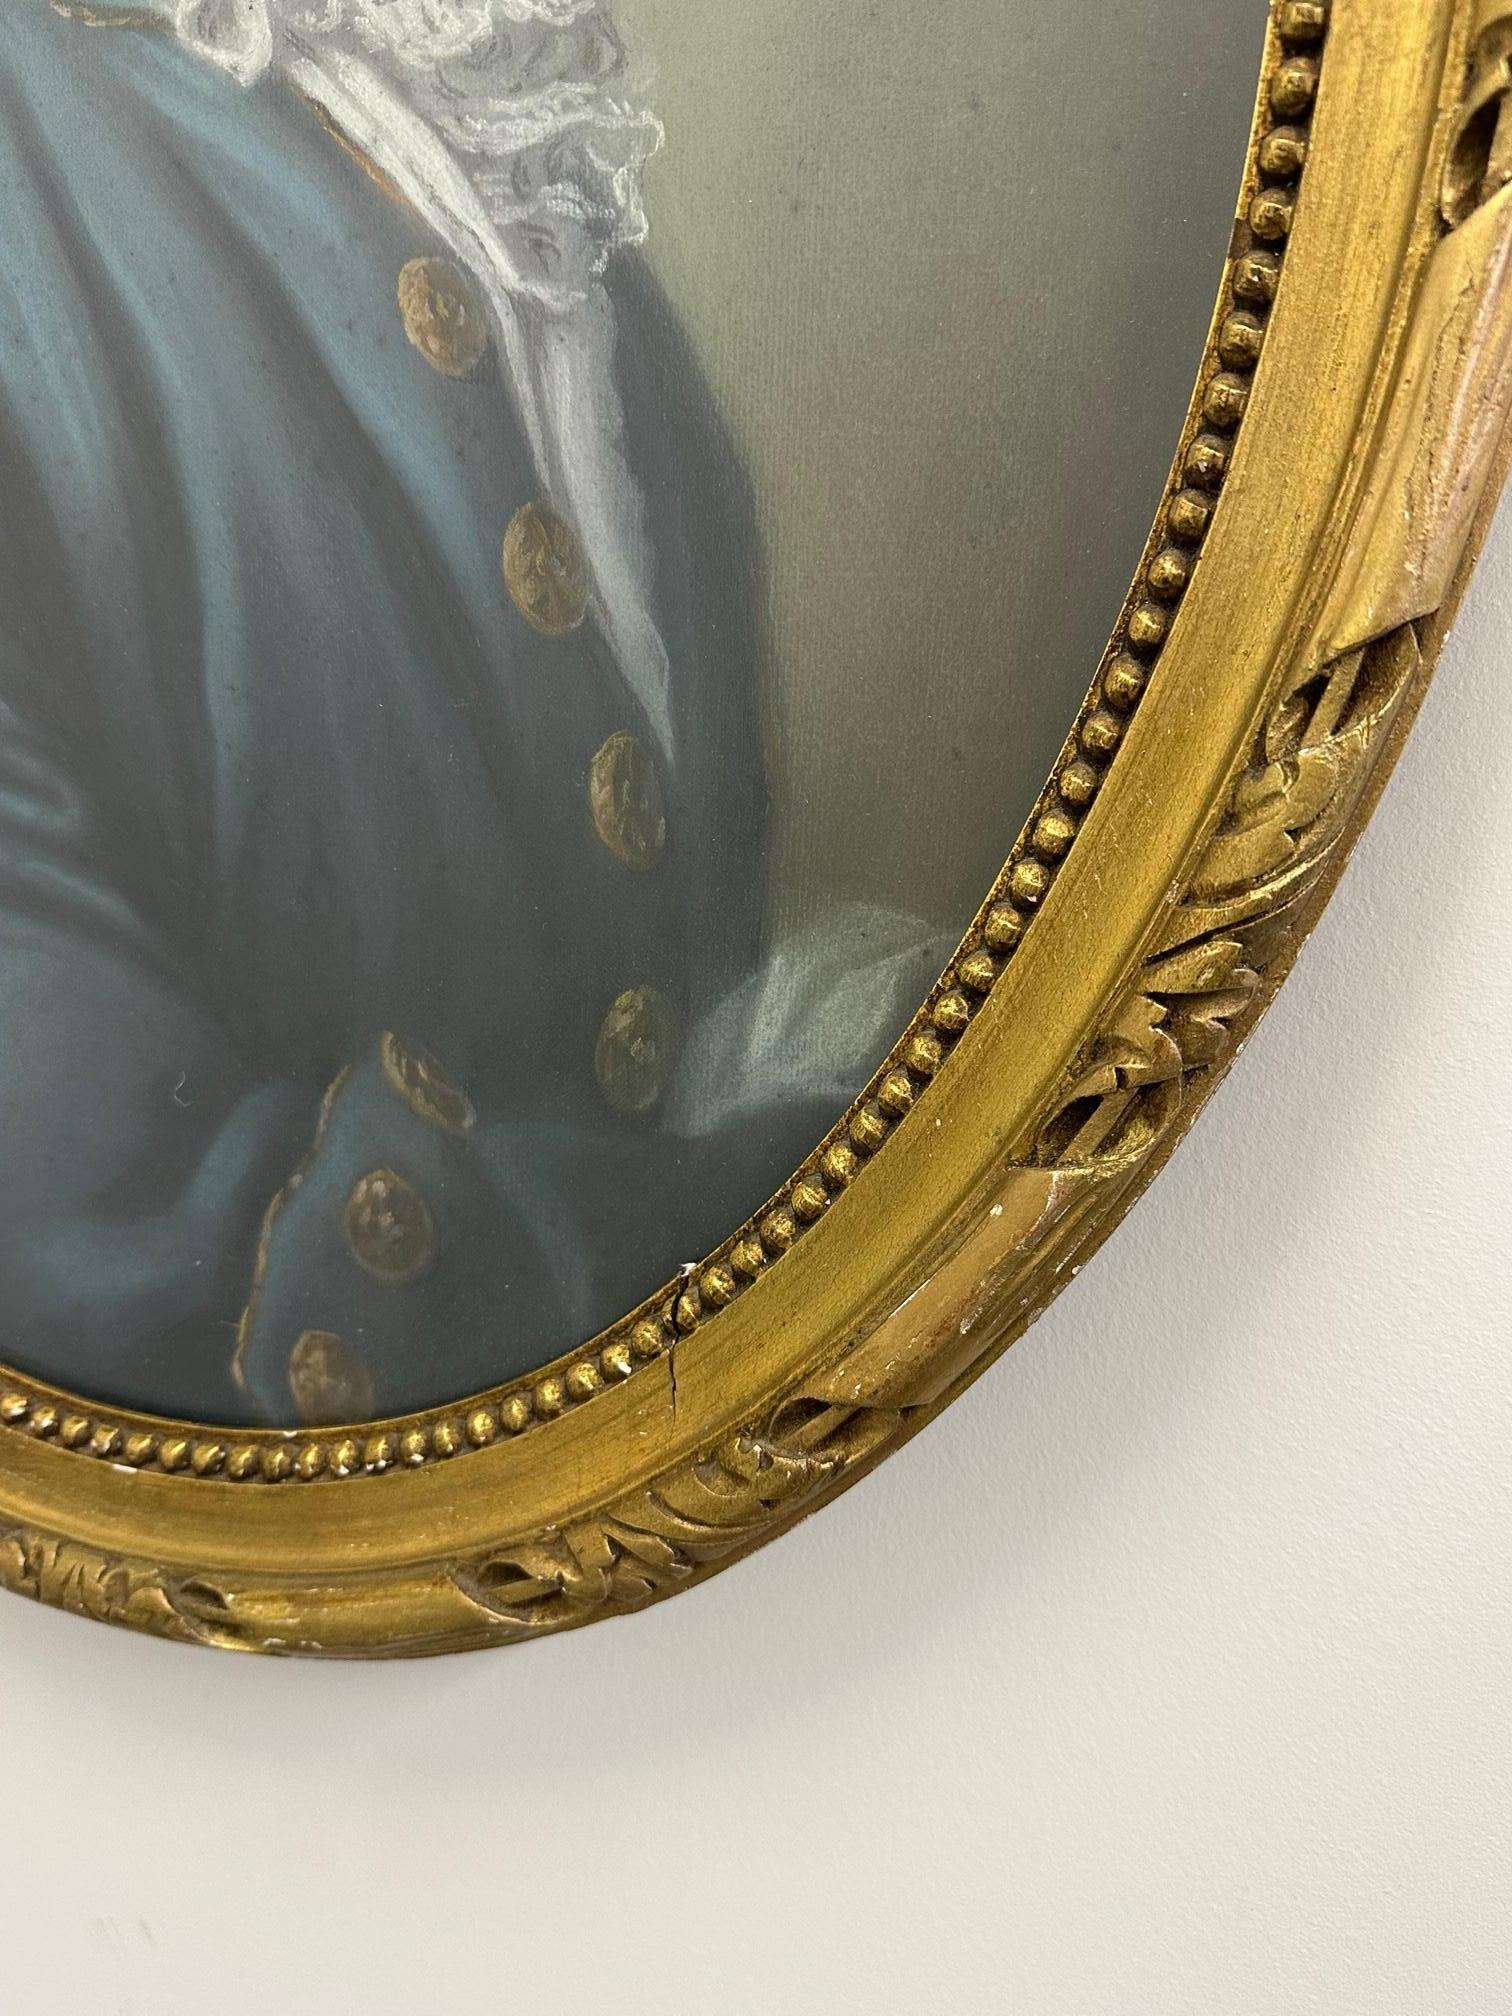 A character rich rendering in pastel of a well dressed 19th century gentleman having powdered wig and fancy jabot around his neck. The oval shape gives it a special allure and the carved wood frame compliments the work of art.